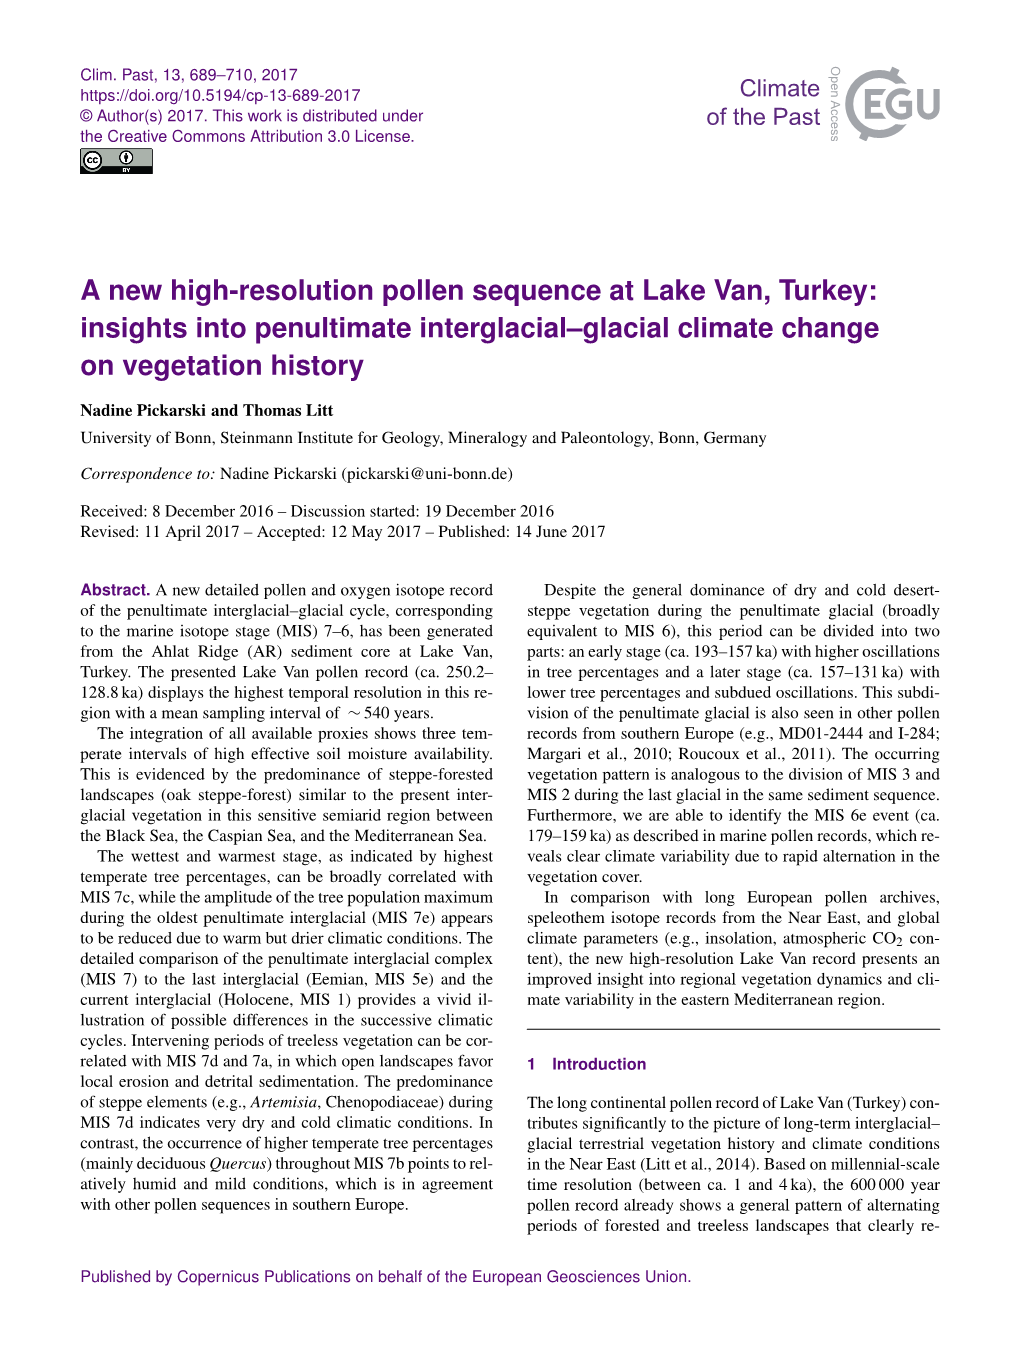 A New High-Resolution Pollen Sequence at Lake Van, Turkey: Insights Into Penultimate Interglacial–Glacial Climate Change on Vegetation History